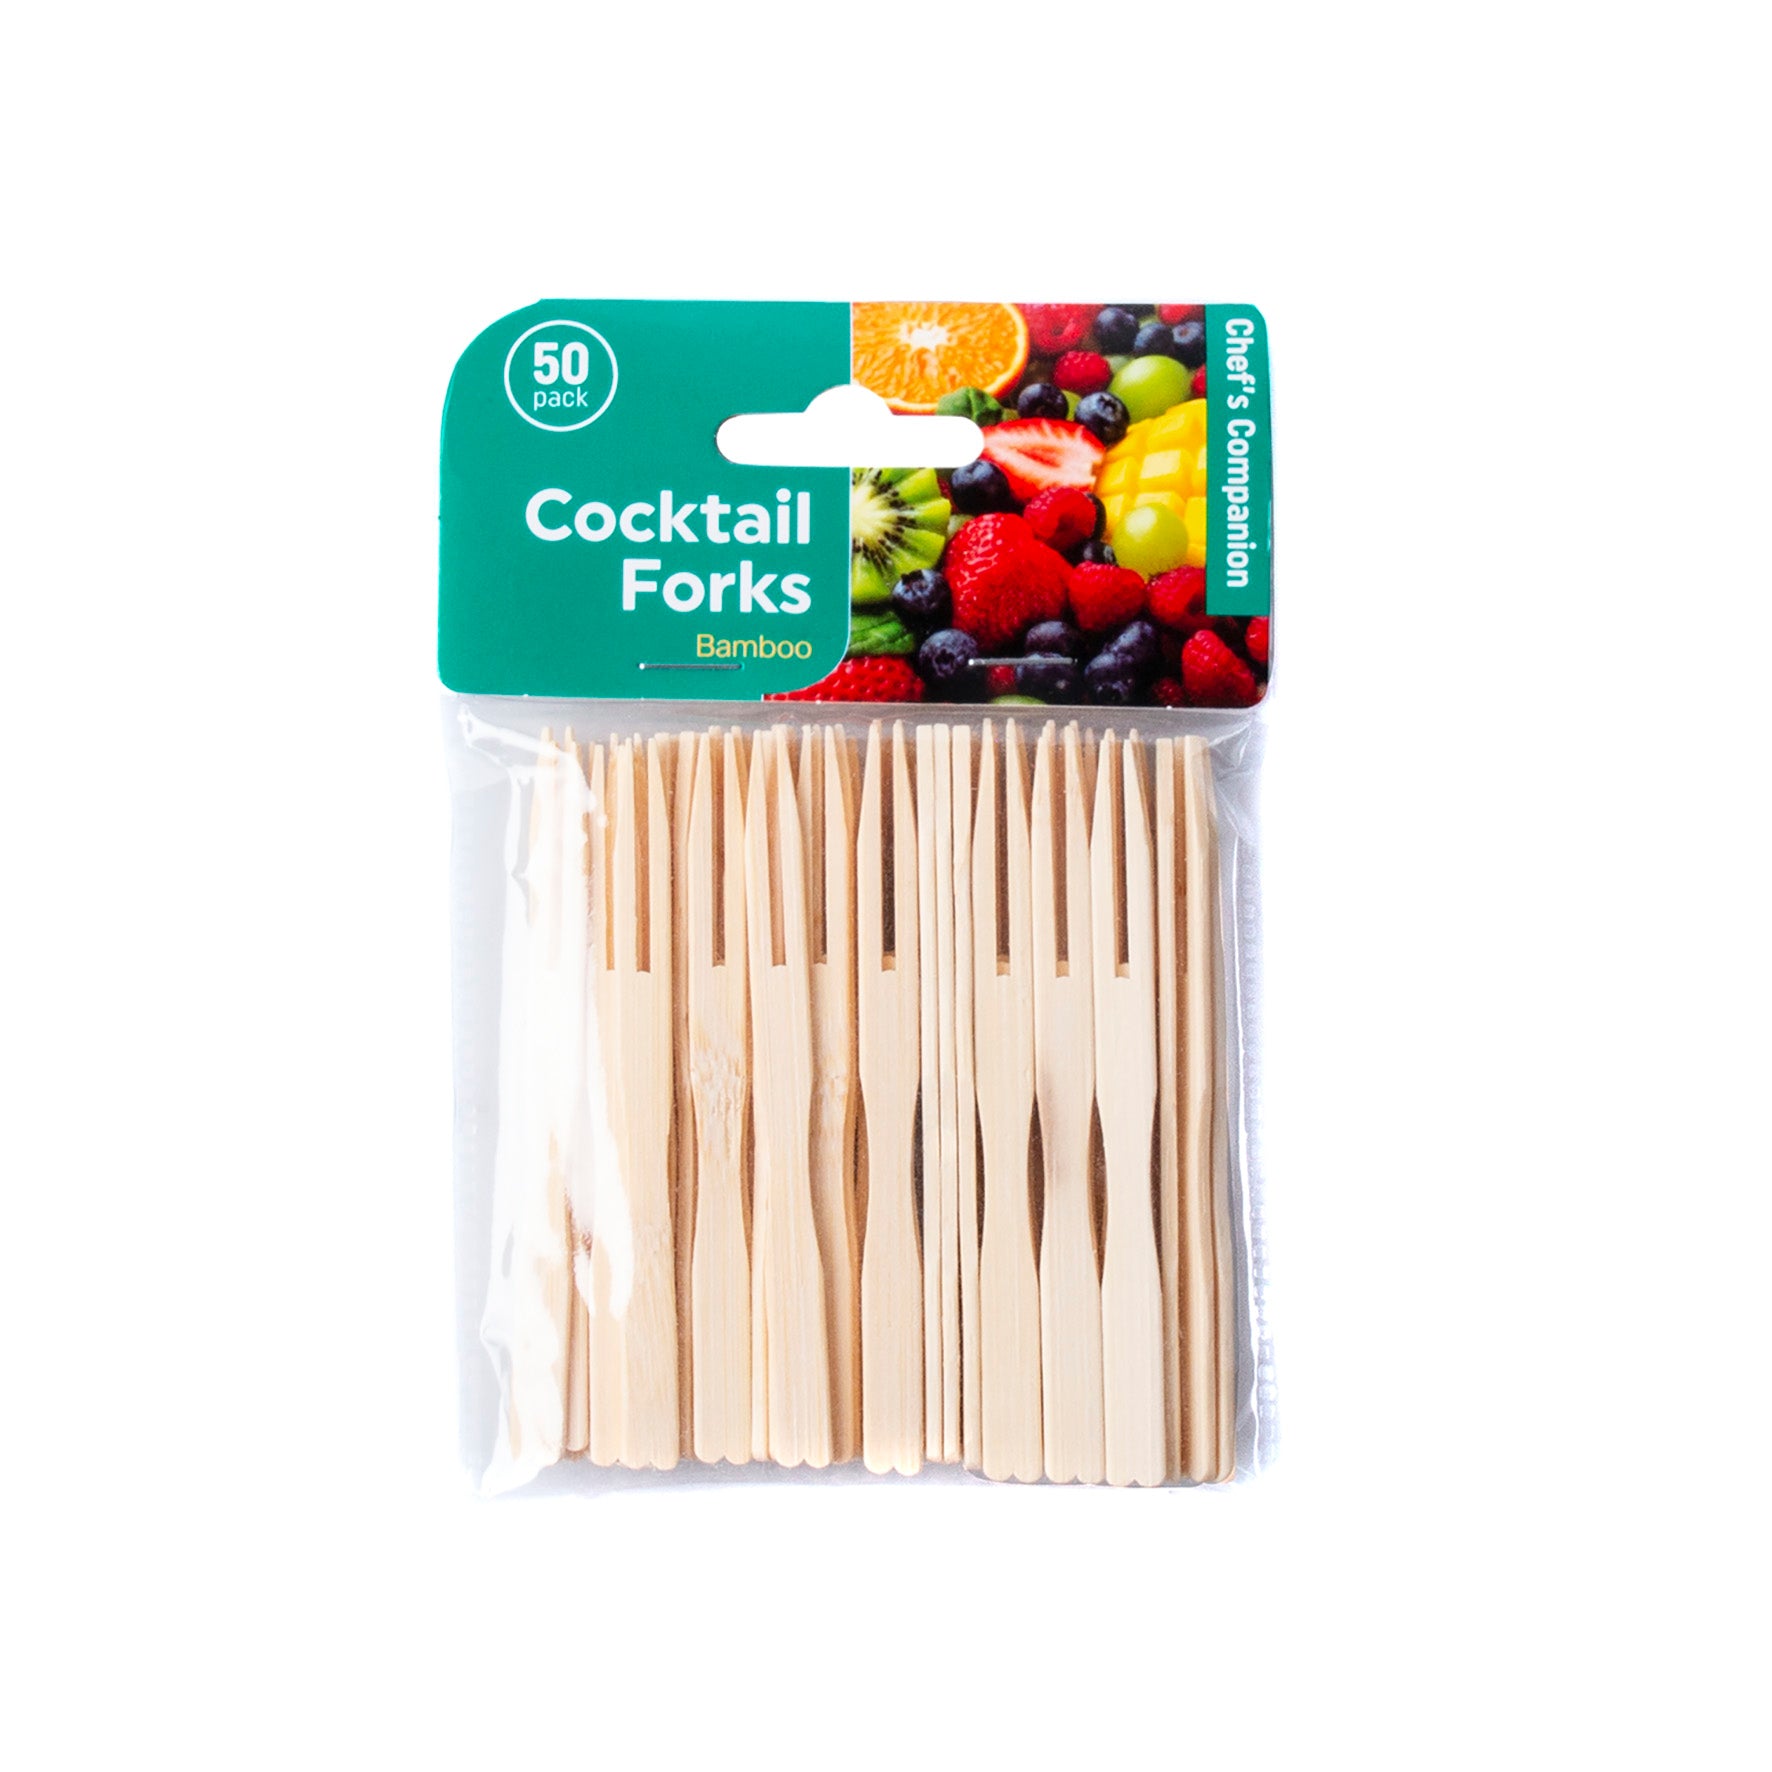 Cocktail Forks Bamboo - 9cm x 3mm 50 Pack 1 Piece - Dollars and Sense